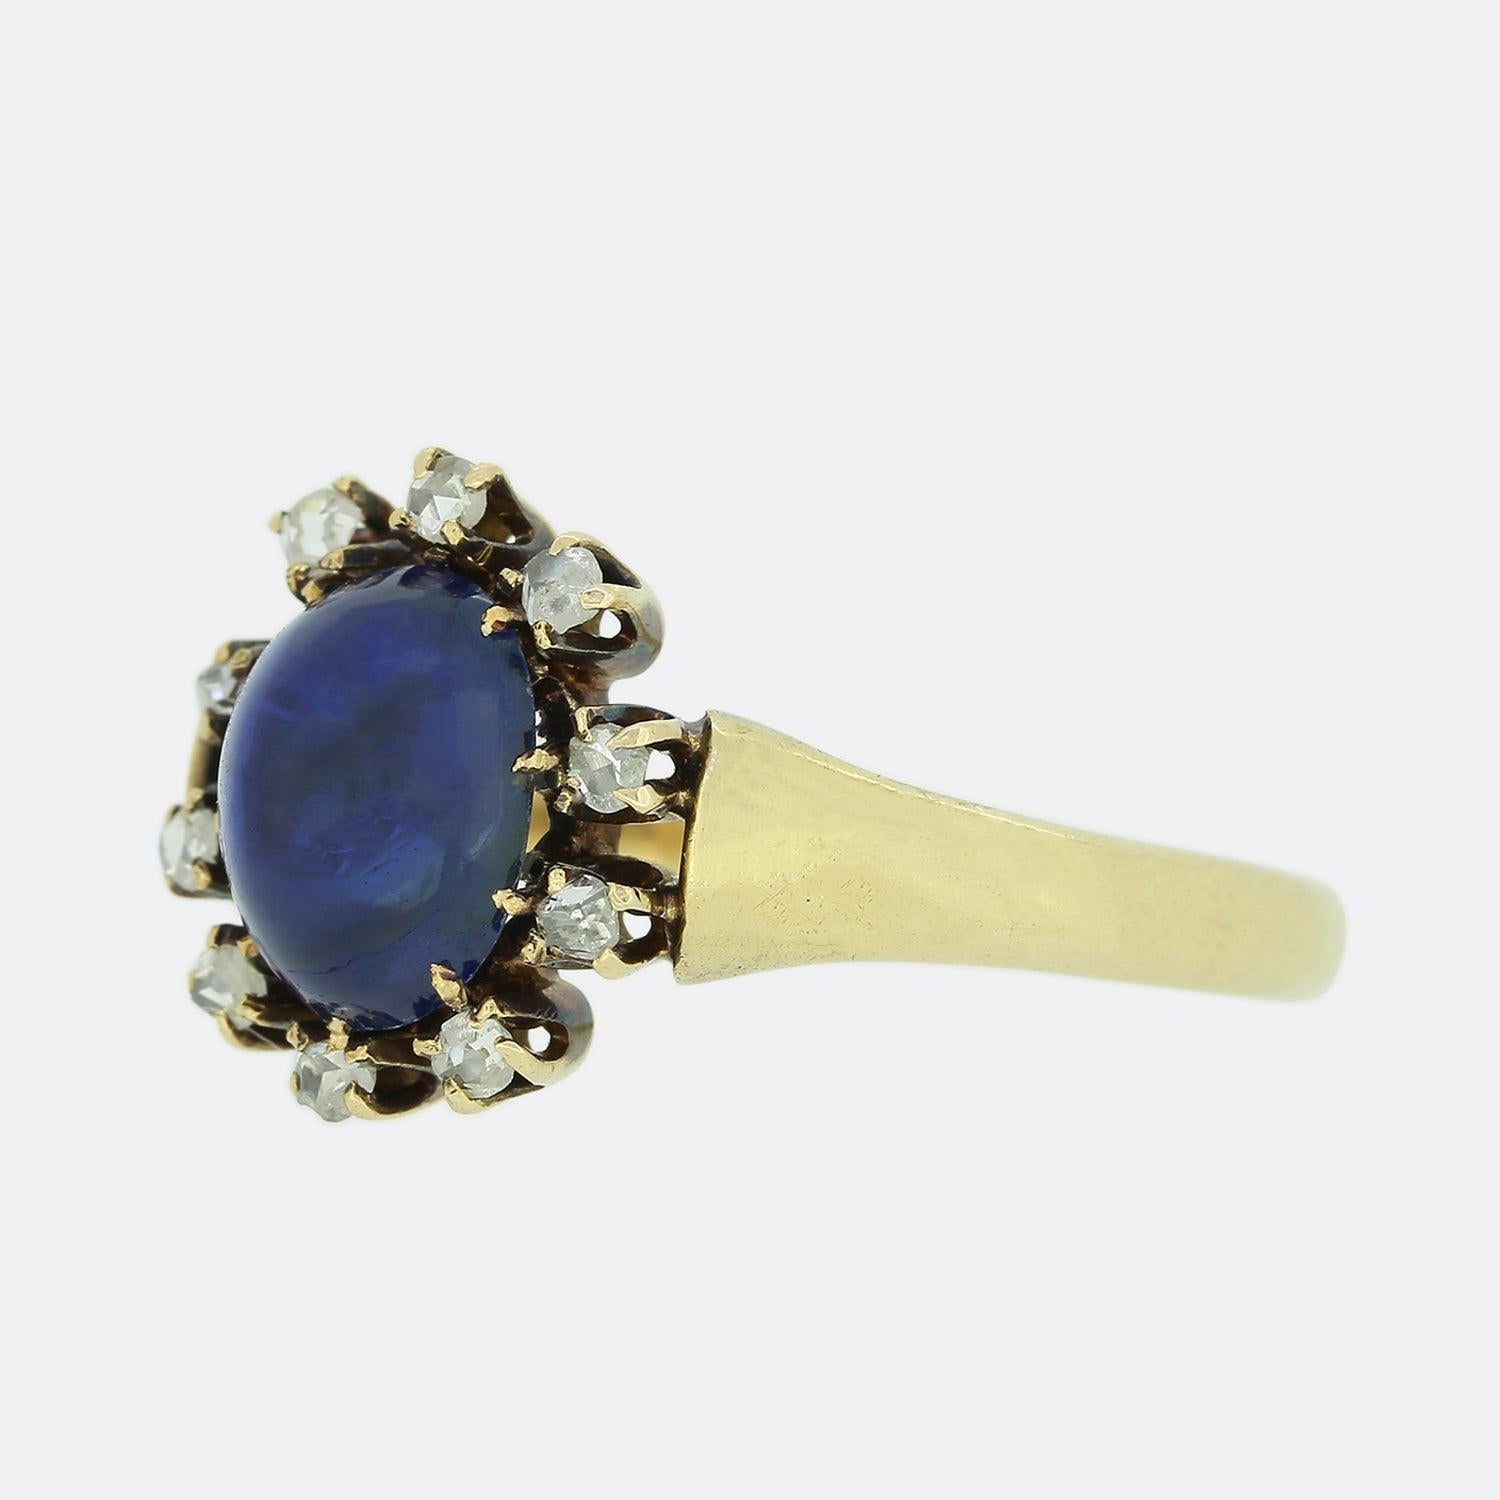 This is a very pretty Victorian sapphire and diamond cluster ring. The ring features a central cabochon sapphire surrounded by a cluster of rose cut diamonds and crafted in 14ct yellow gold with a tapered band.

Condition: Used (Very Good)
Weight: